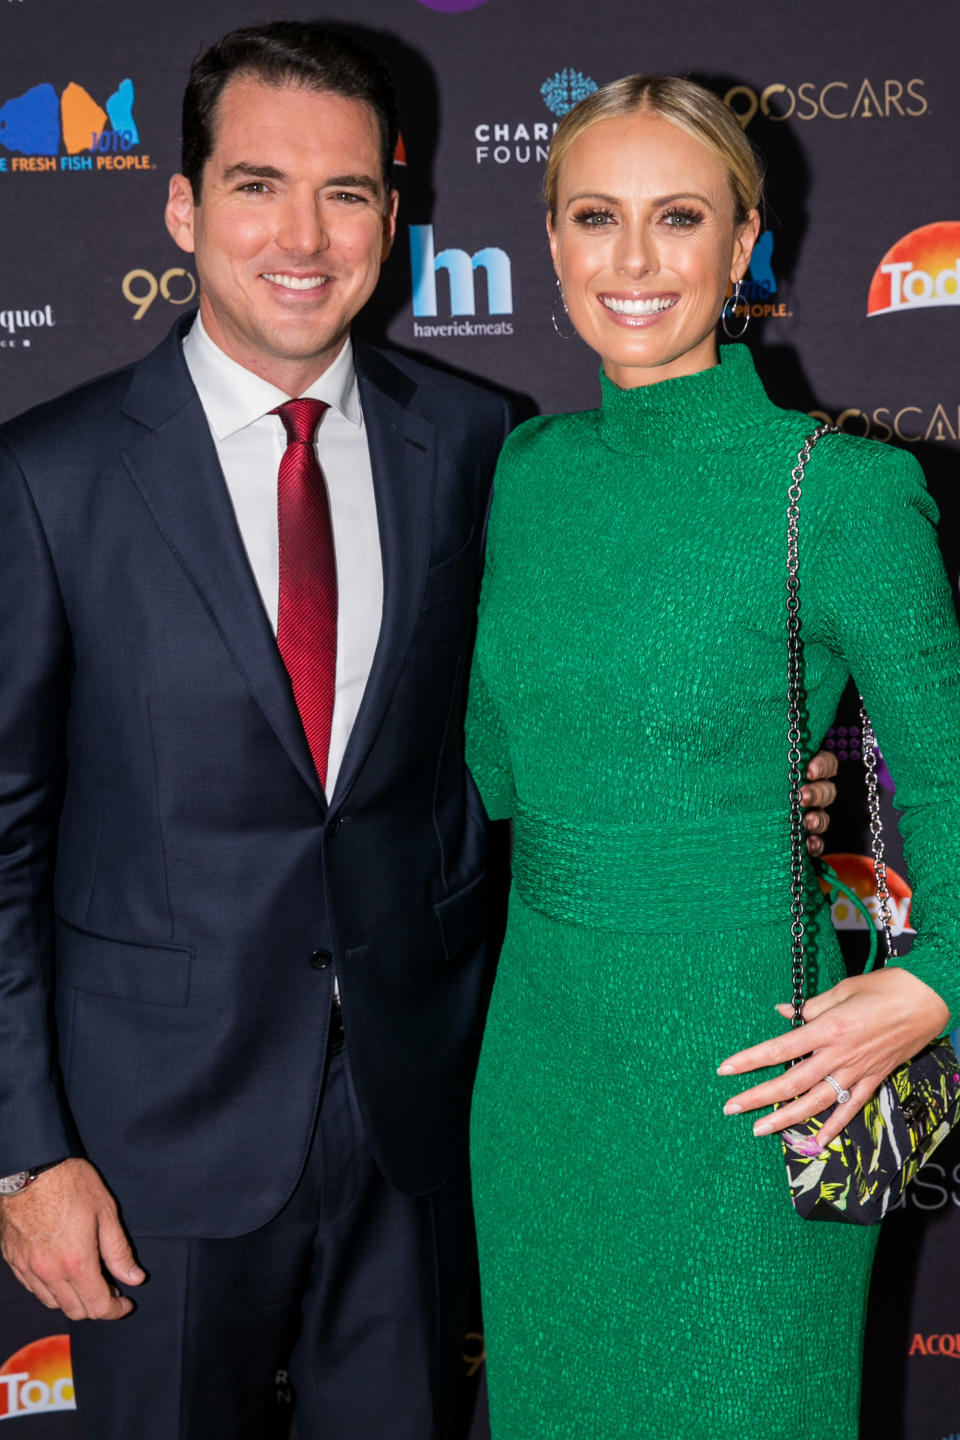 A photo of Sylvia Jeffreys and Peter Stefanovic at the Channel 9 Charity Oscars lunch raising money for the Charlie Teo Foundation at Glass Restaurant, The Hilton, on March 5, 2018 in Sydney, Australia.